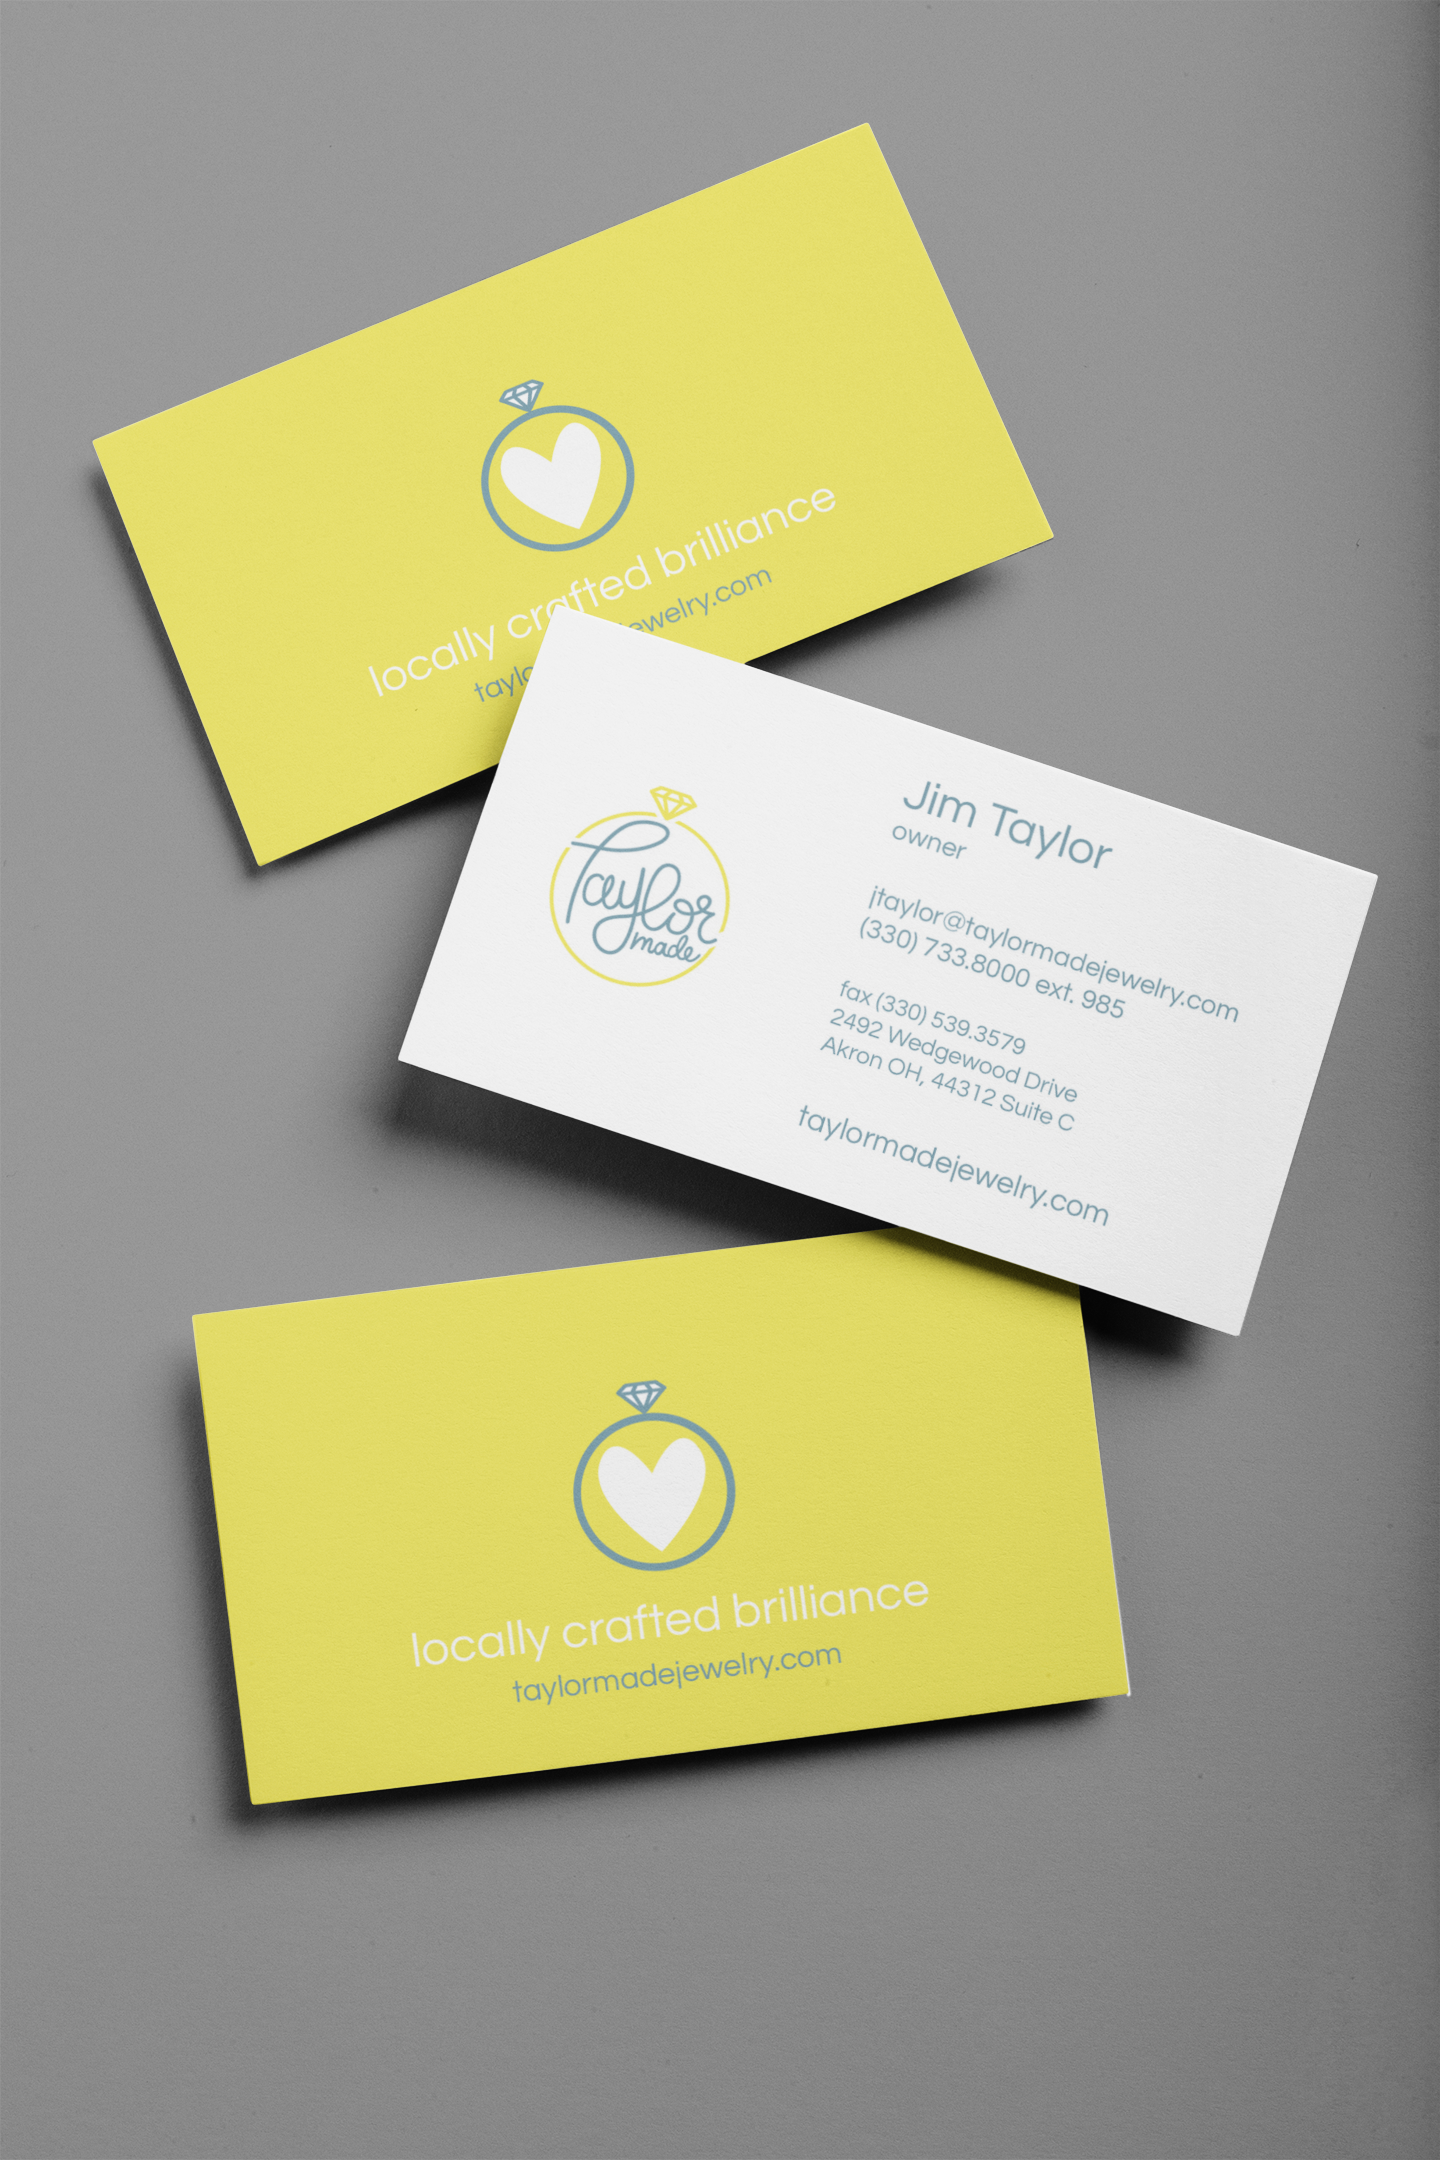 taylor-business cards.png